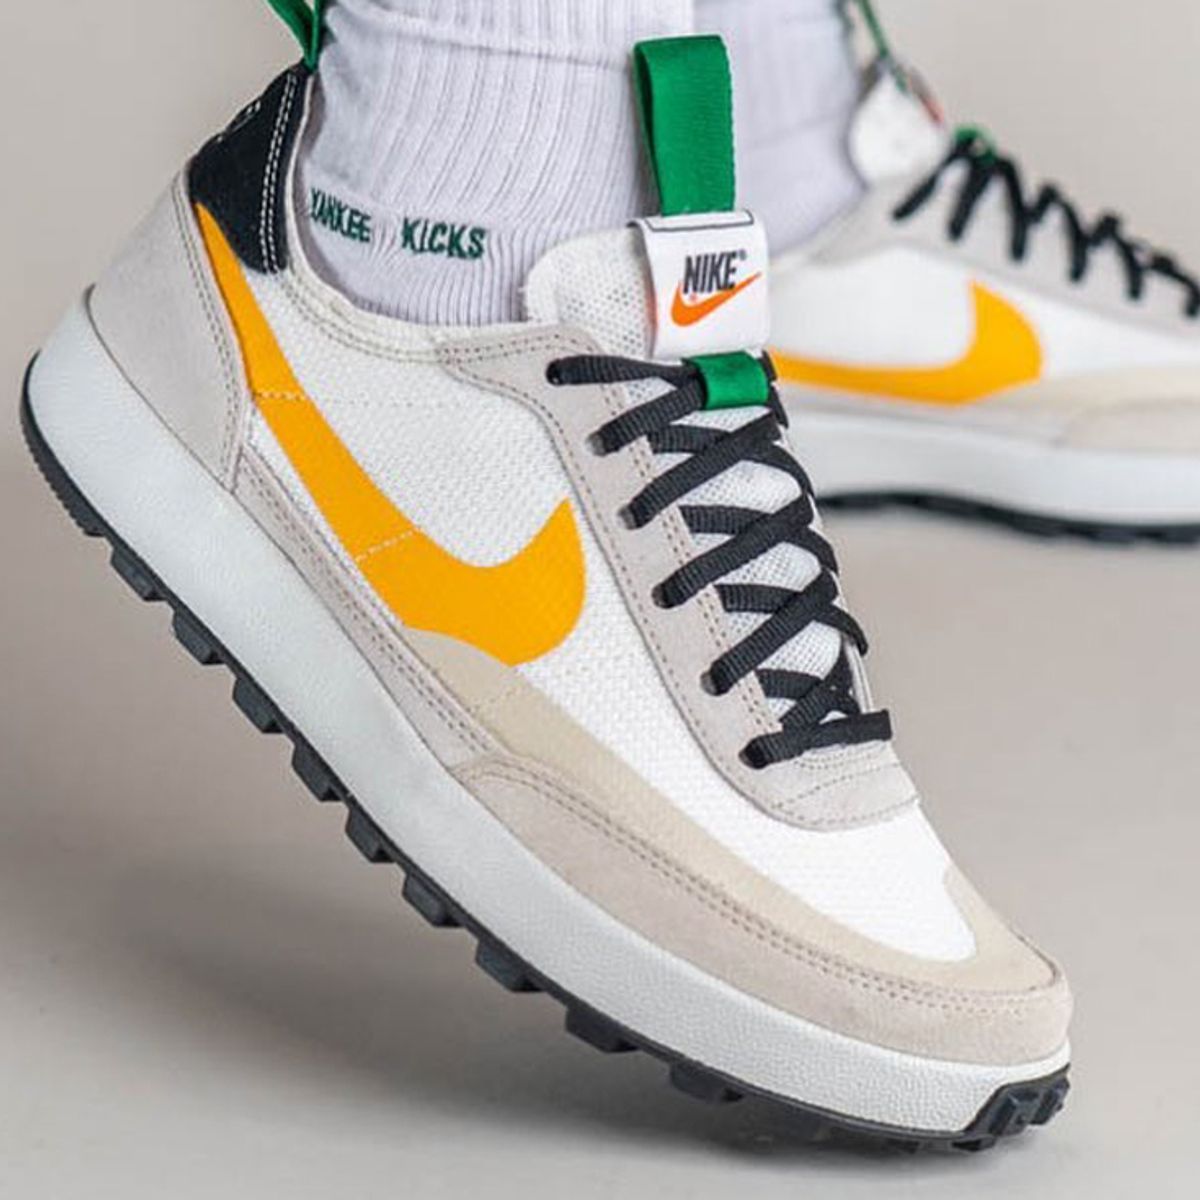 Gorge Green Accents This Tom Sachs x NikeCraft GPS - Sneaker News